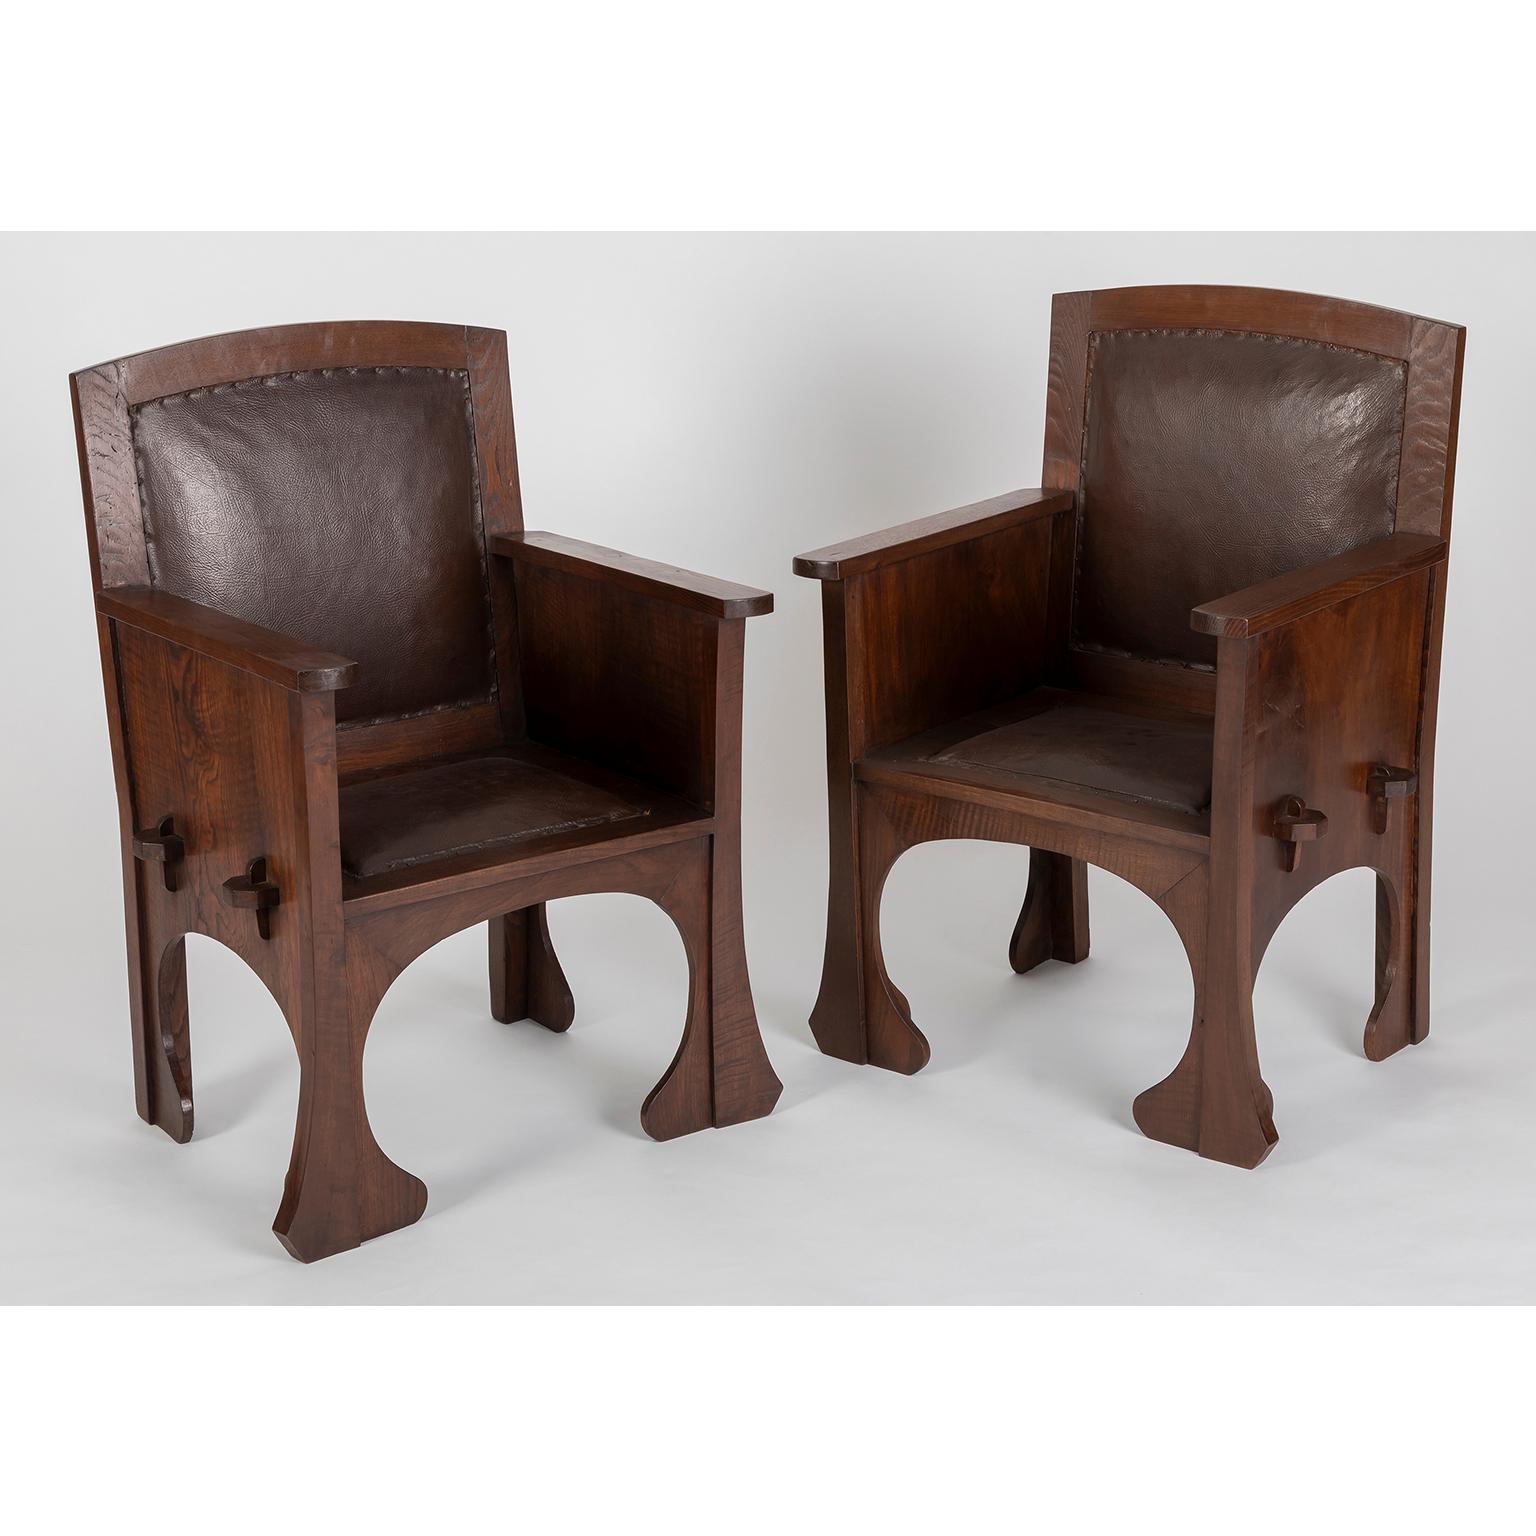 This wonderful set in in an excellent vintage condition and has a unique country appeal. 

Although of their apparent massive look, they have a great size to use as a side chair.

Dimensions: Width 66 cm; Depth 53 cm; Total Height 91 cm; Arm